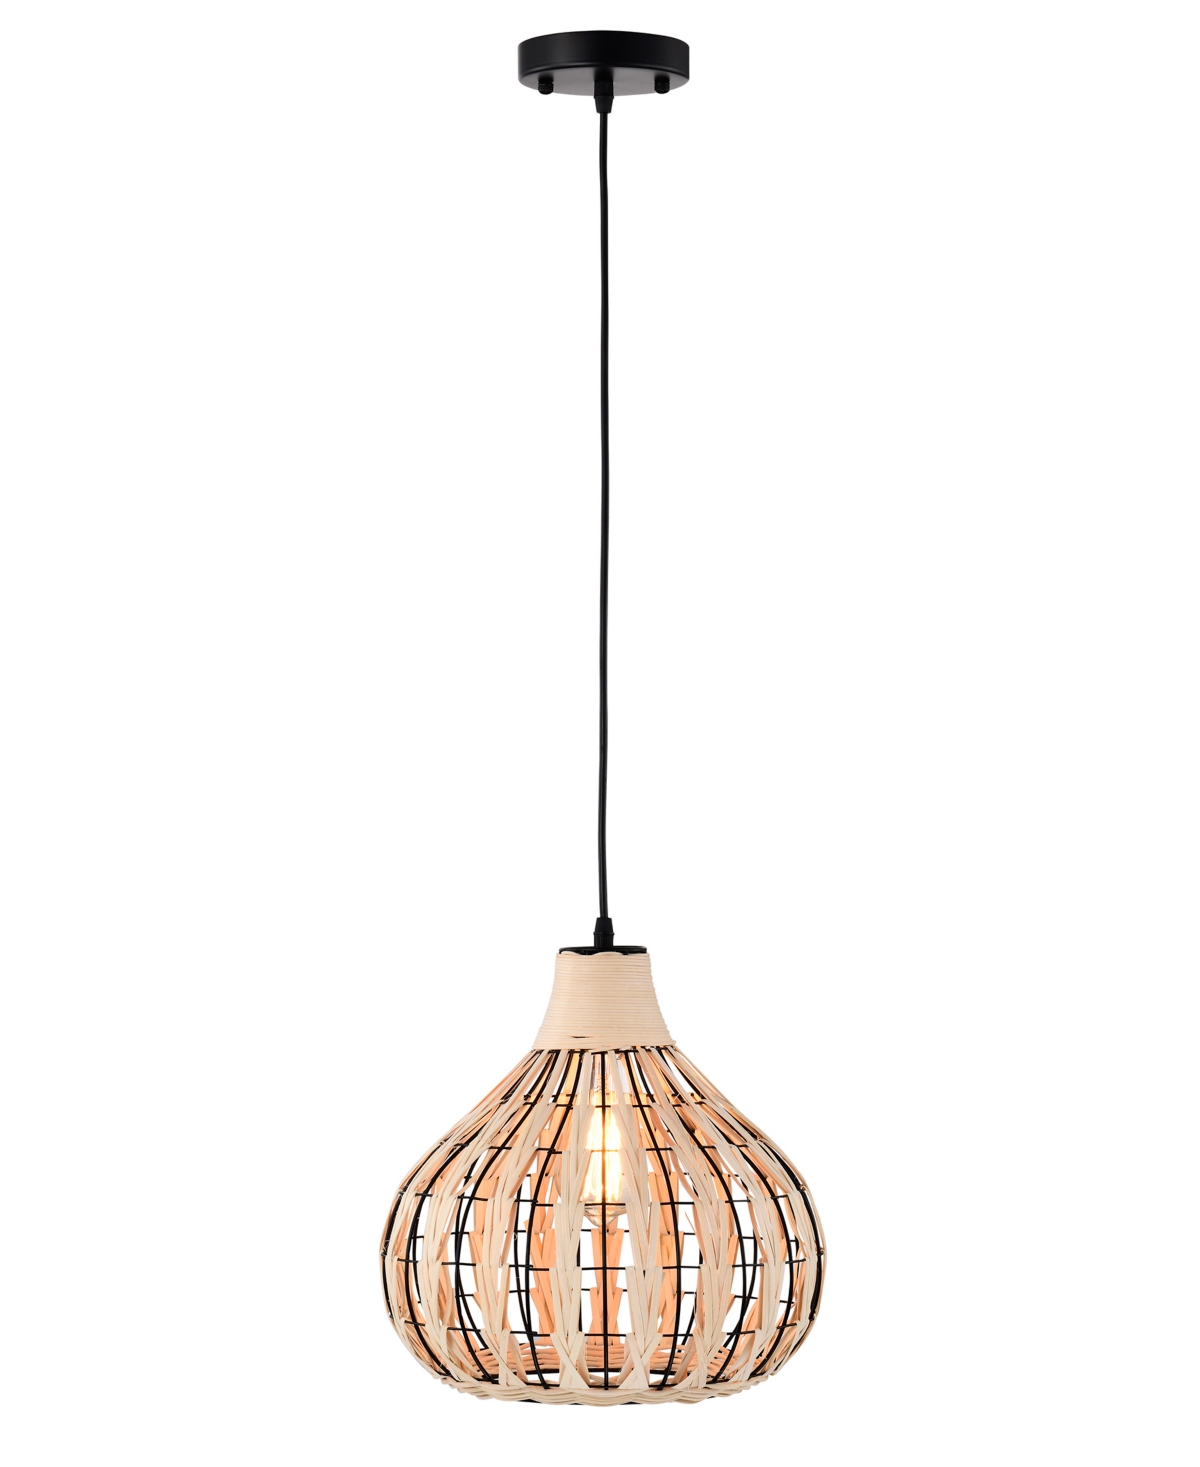 Home Accessories Zilpah 12" Indoor Finish Pendant With Light Kit In Matte Black And Woven Rattan